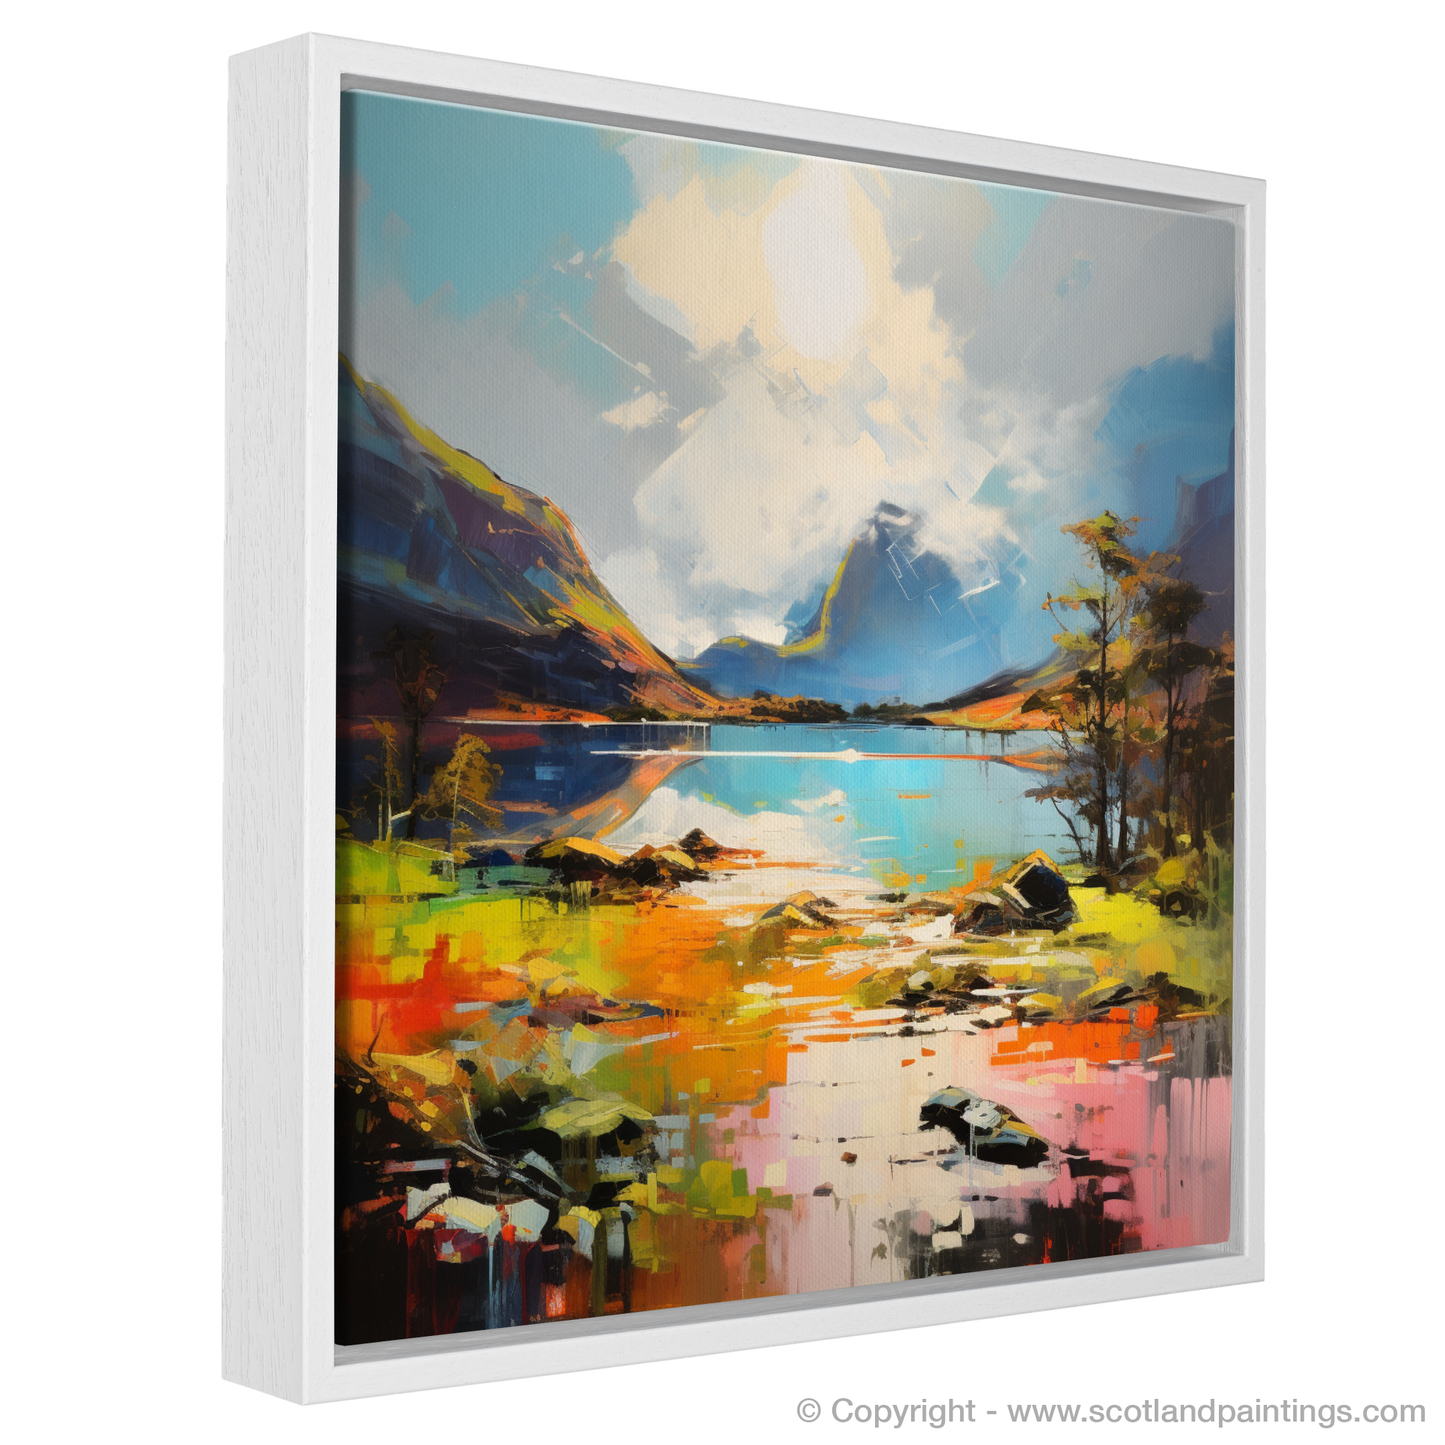 Painting and Art Print of Loch Maree, Wester Ross in summer entitled "Summer's Embrace at Loch Maree".